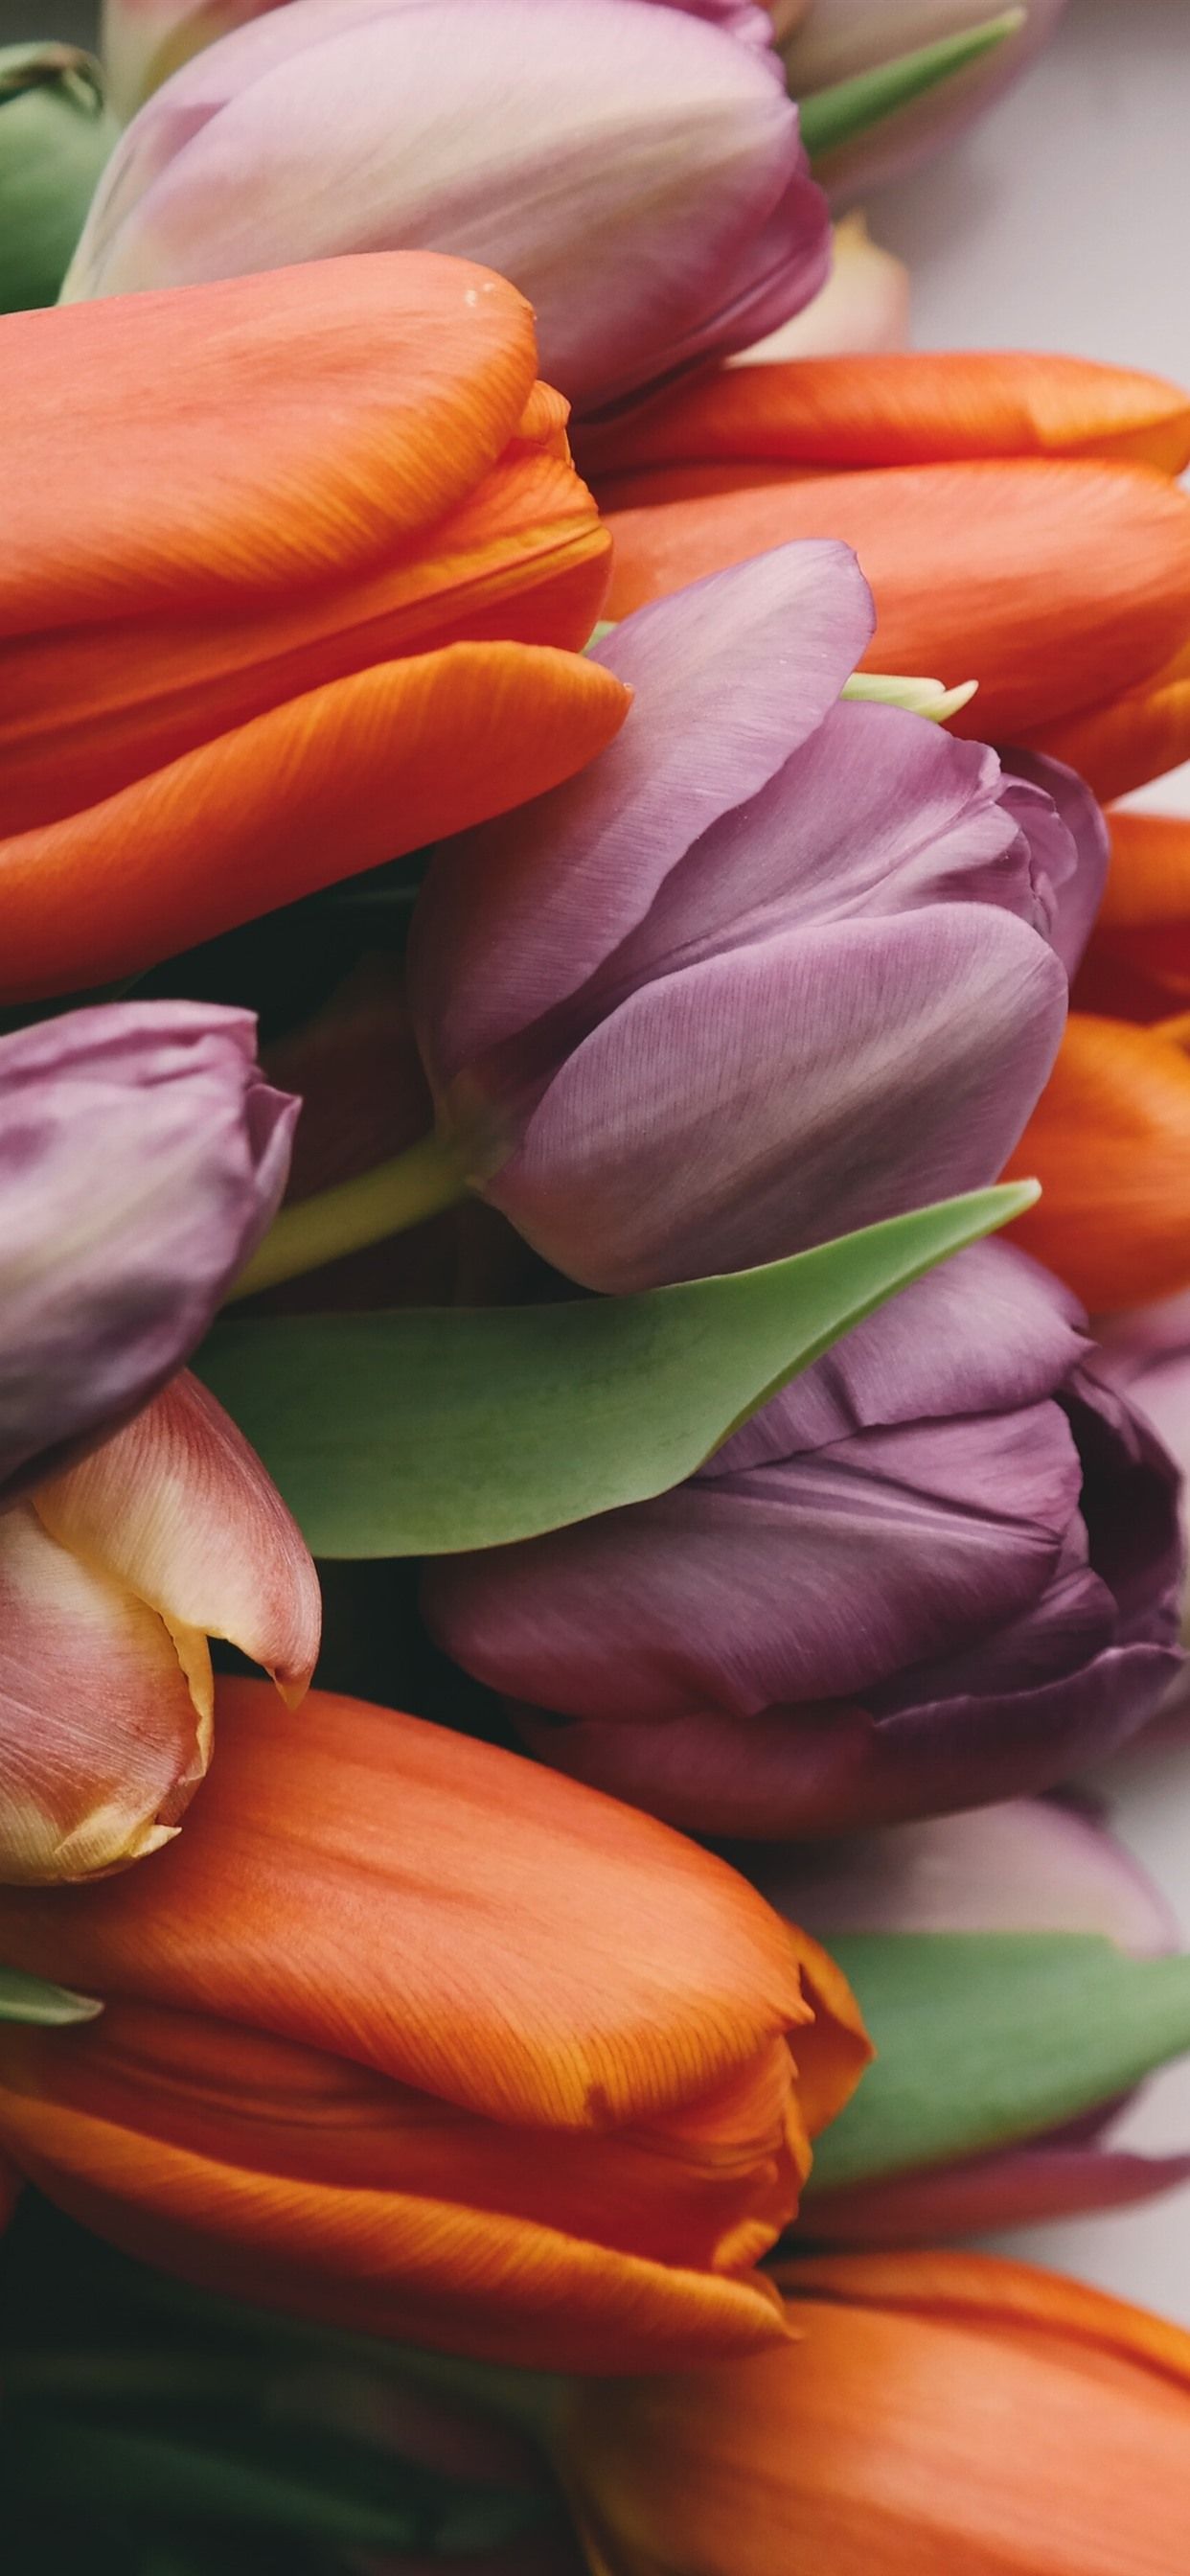 Purple And Orange Tulips, Bouquet 1242x2688 IPhone 11 Pro XS Max Wallpaper, Background, Picture, Image